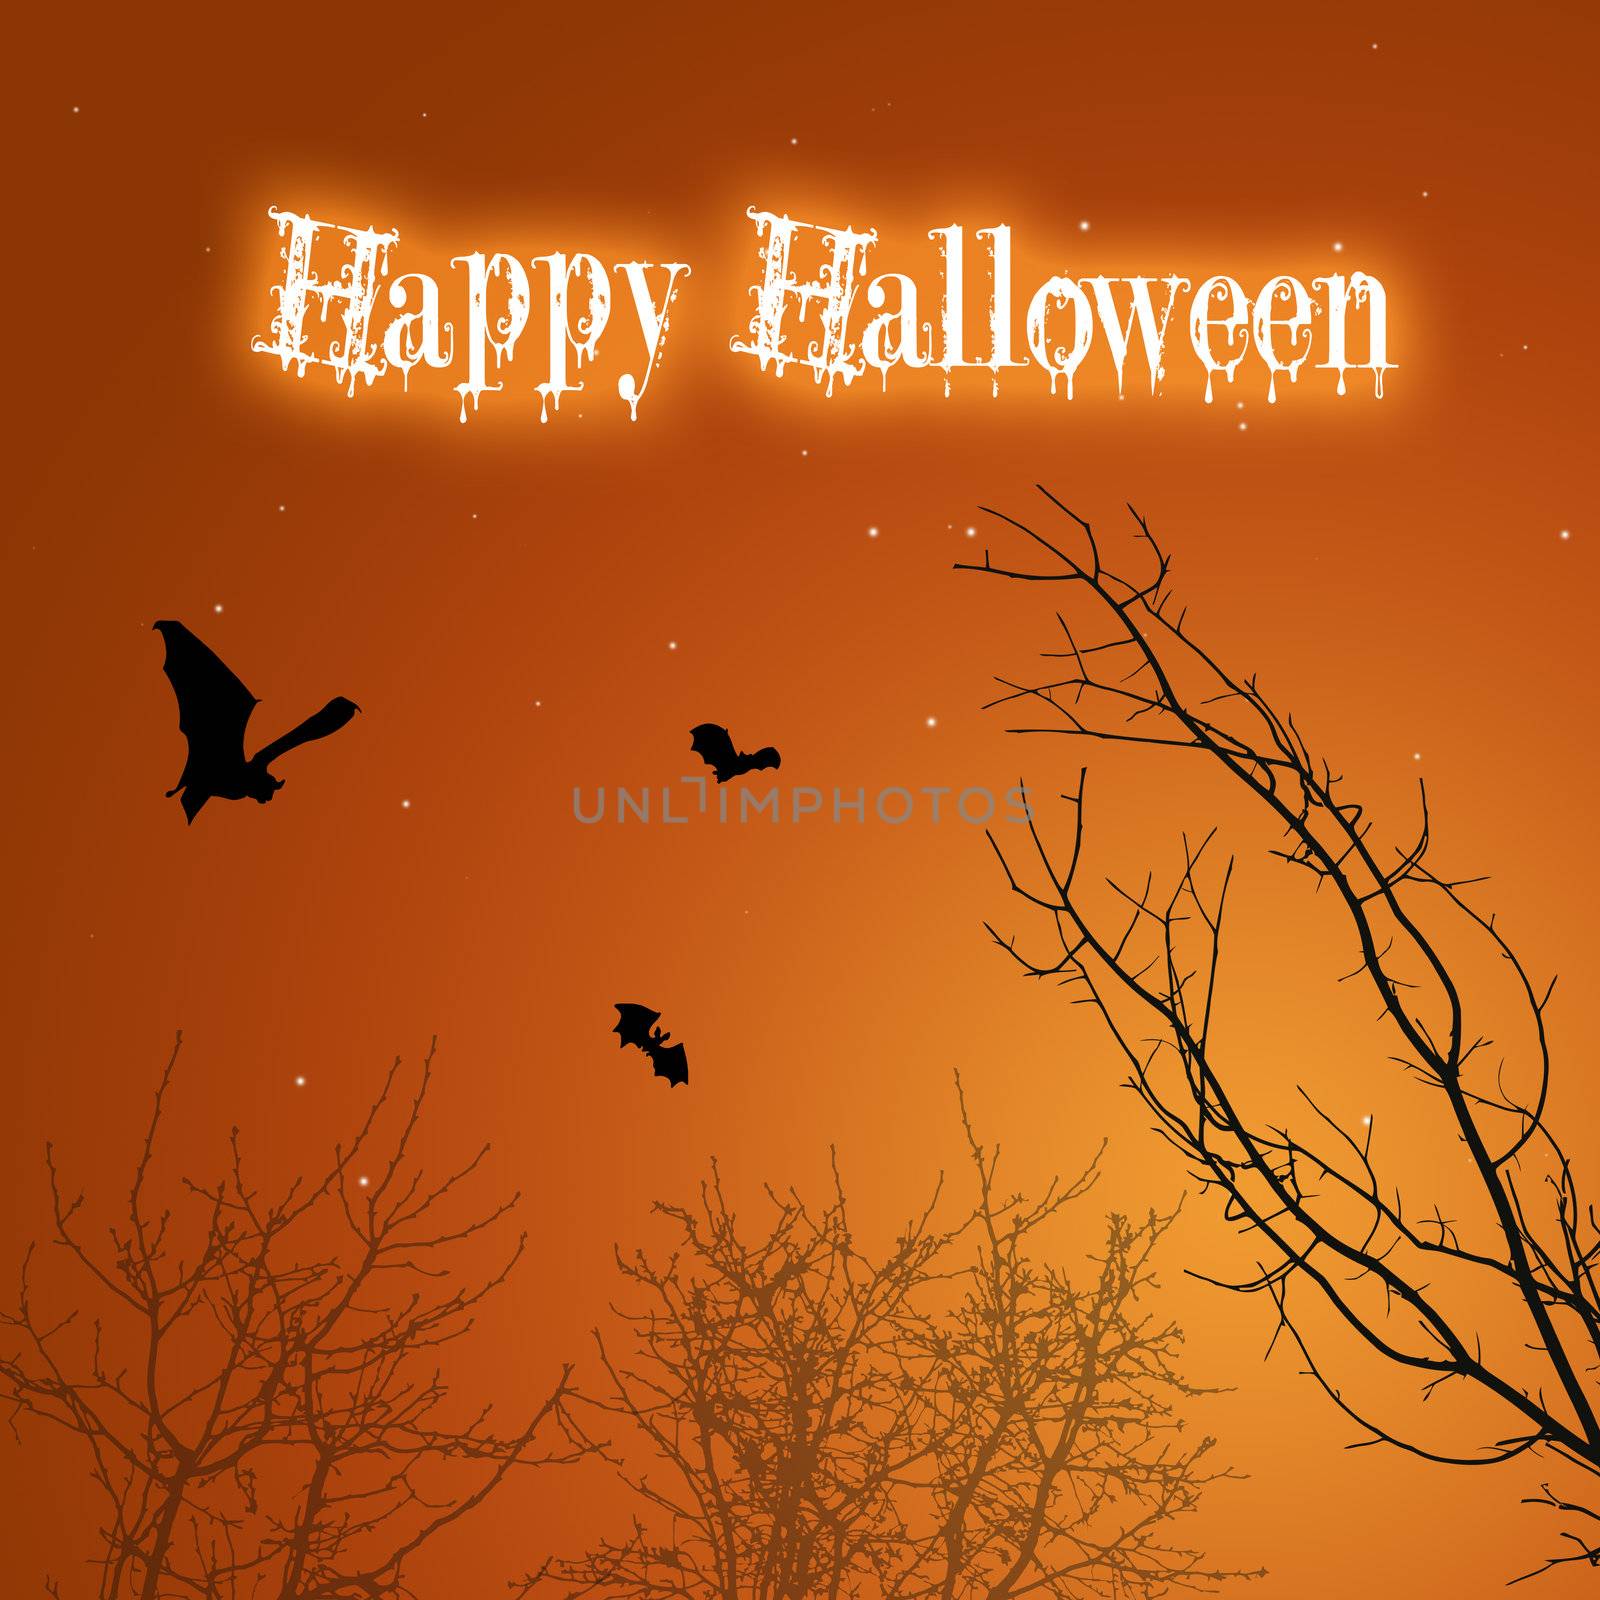 A silhouette Halloween illustration: Spooky black bats and creepy trees with a drippy "Happy Halloween" Greeting on a mystic background.